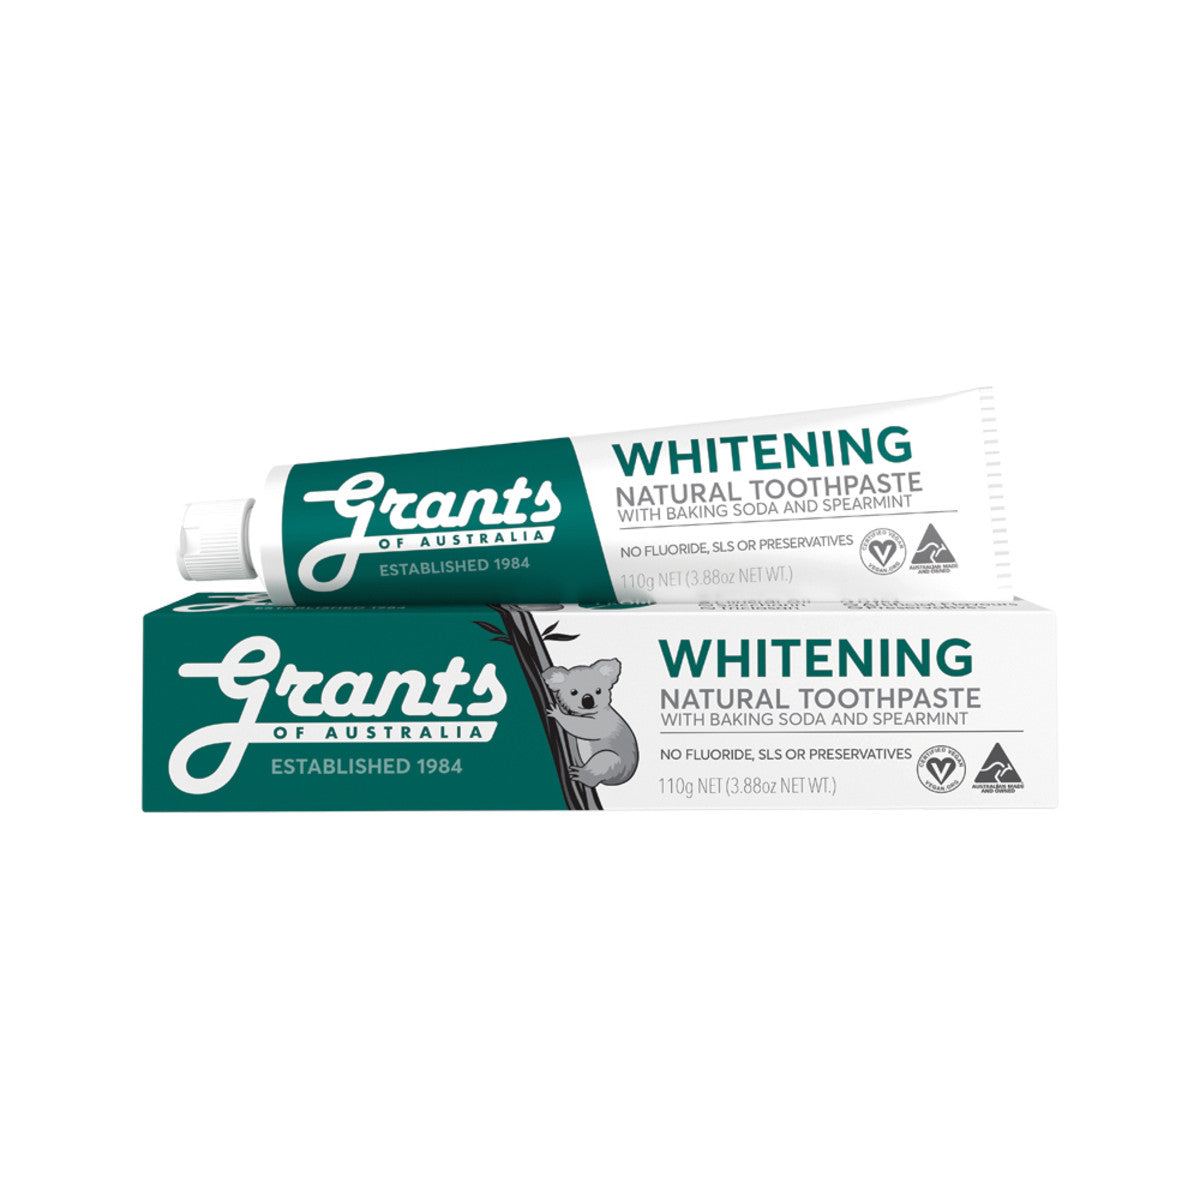 Grants - Natural Toothpaste (Whitening with Baking Soda & Spearmint, Flouride Free)